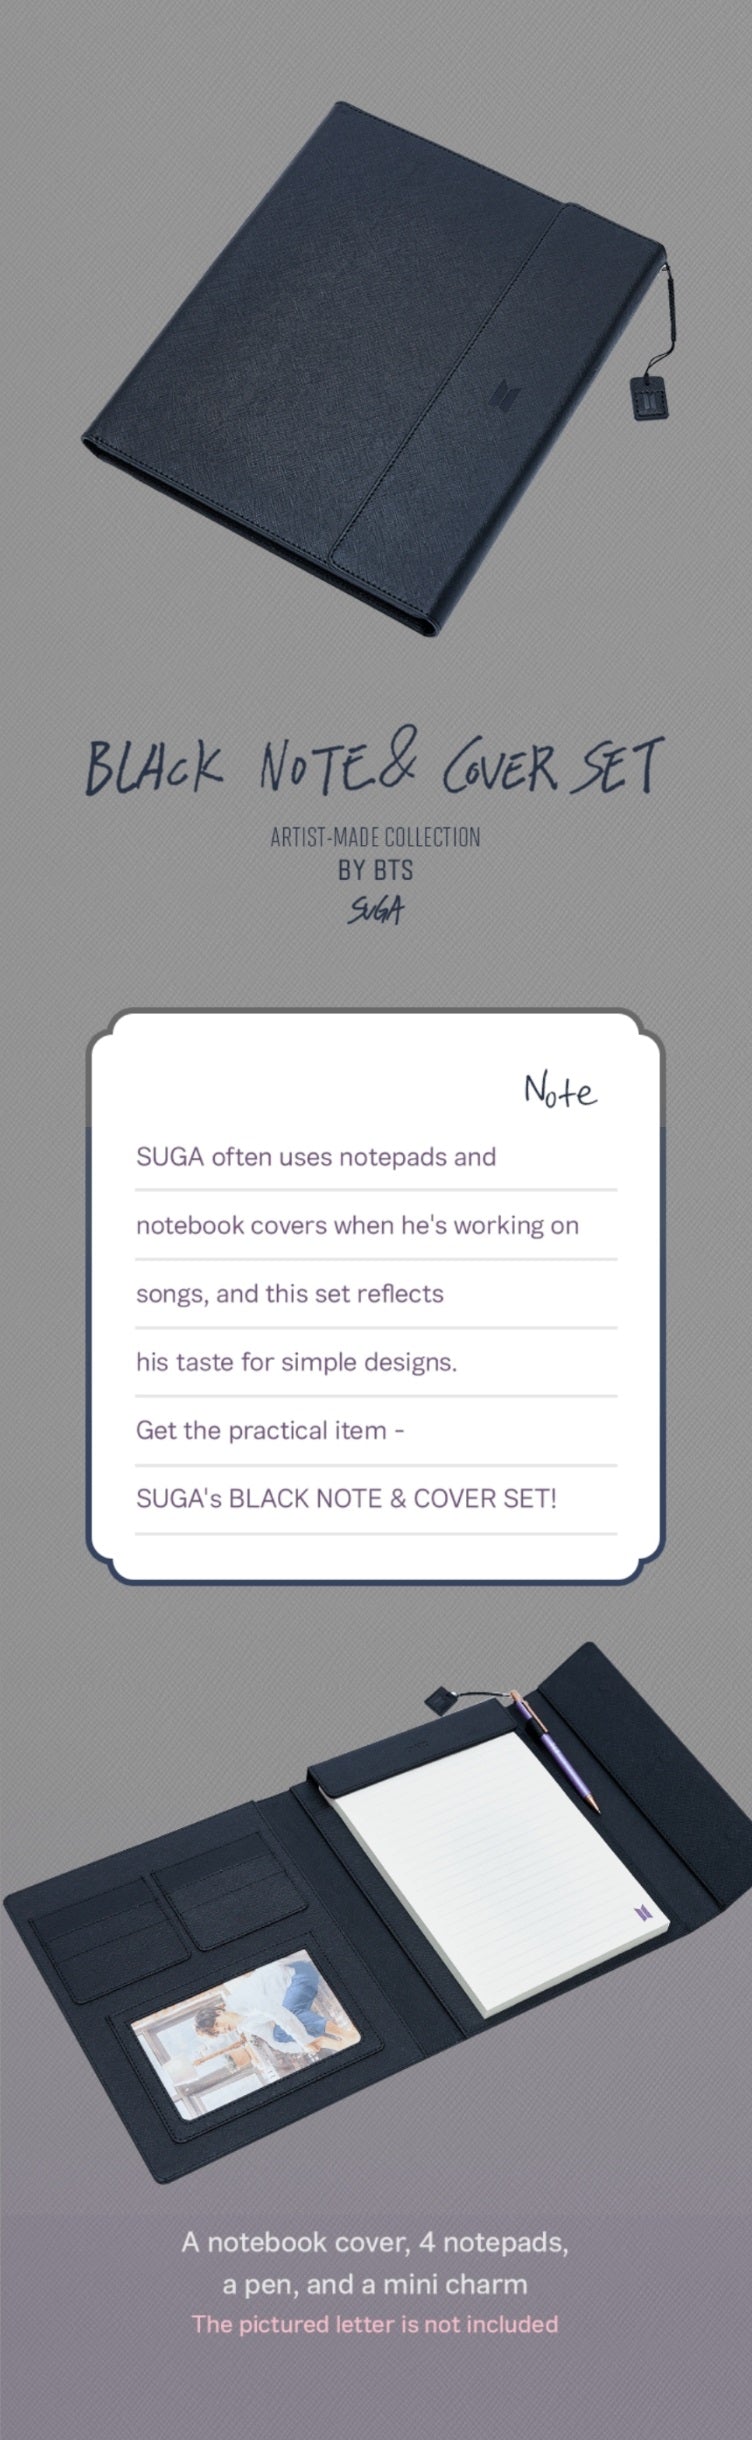 BTS x HYBE: ARTIST-MADE COLLECTION BY BTS SUGA – Kpop Omo